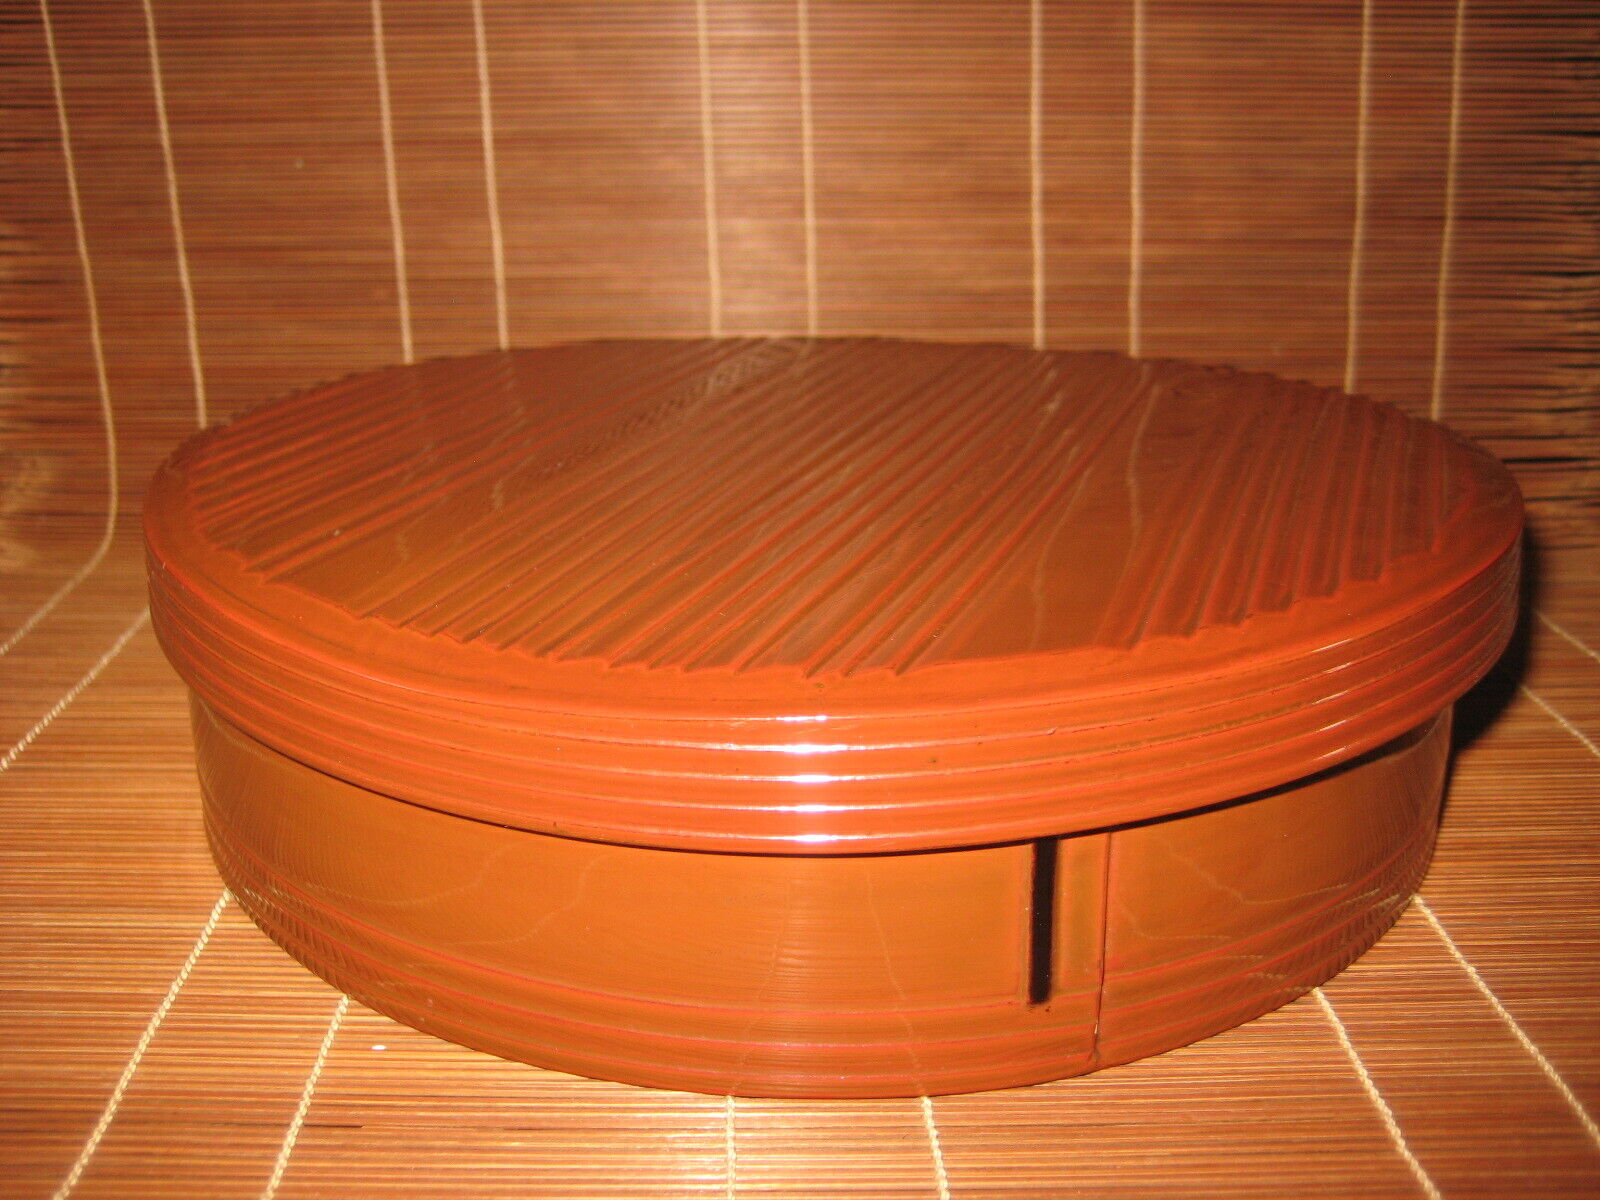 Japanese Lacquered Wooden Lunch Box Lidded Bento Jubako 2 Tiers